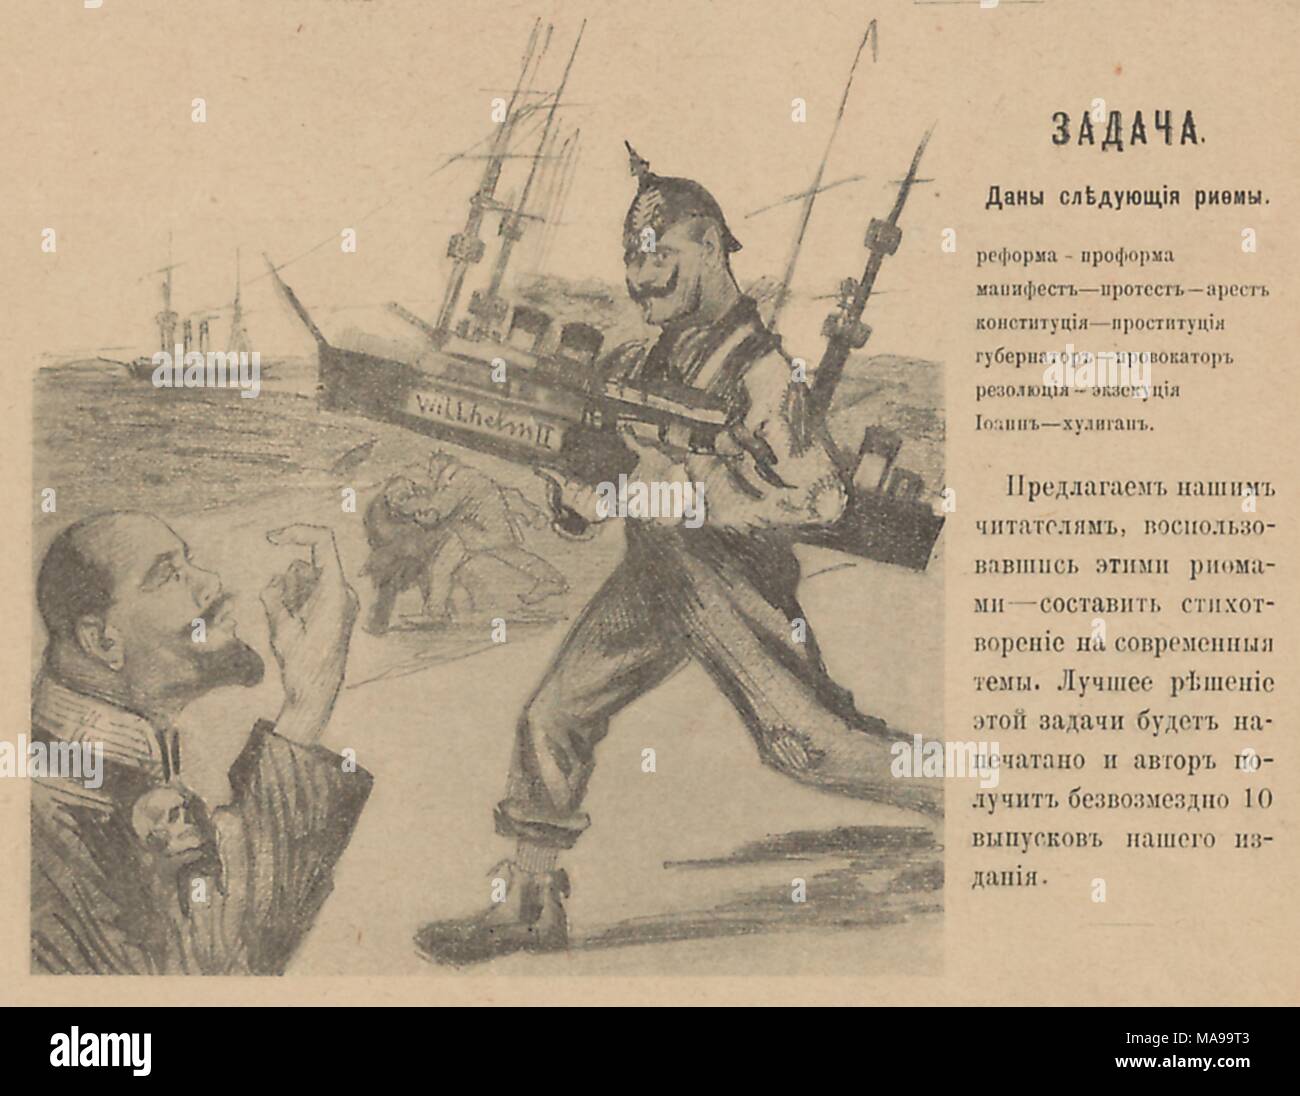 Cartoon from the Russian satirical journal 'Signal' depicting the last German Emperor, Wilhelm II, wearing patched trousers and shirt, work boots, his upturned mustache (Kaiser mustache), and a spiked helmet (Pickelhaube), and carrying a liner ship captioned 'Wilhelm II, ' with two men fighting at midground, beneath the boat's bow, the ocean and another boat in the background, and in the left foreground, a balding, bearded man, likely Tsar Nicholas II, wearing a military coat with a skull near the chest, bekoning to Wilhem II, published circa 1905, during the period of widespread social and po Stock Photo